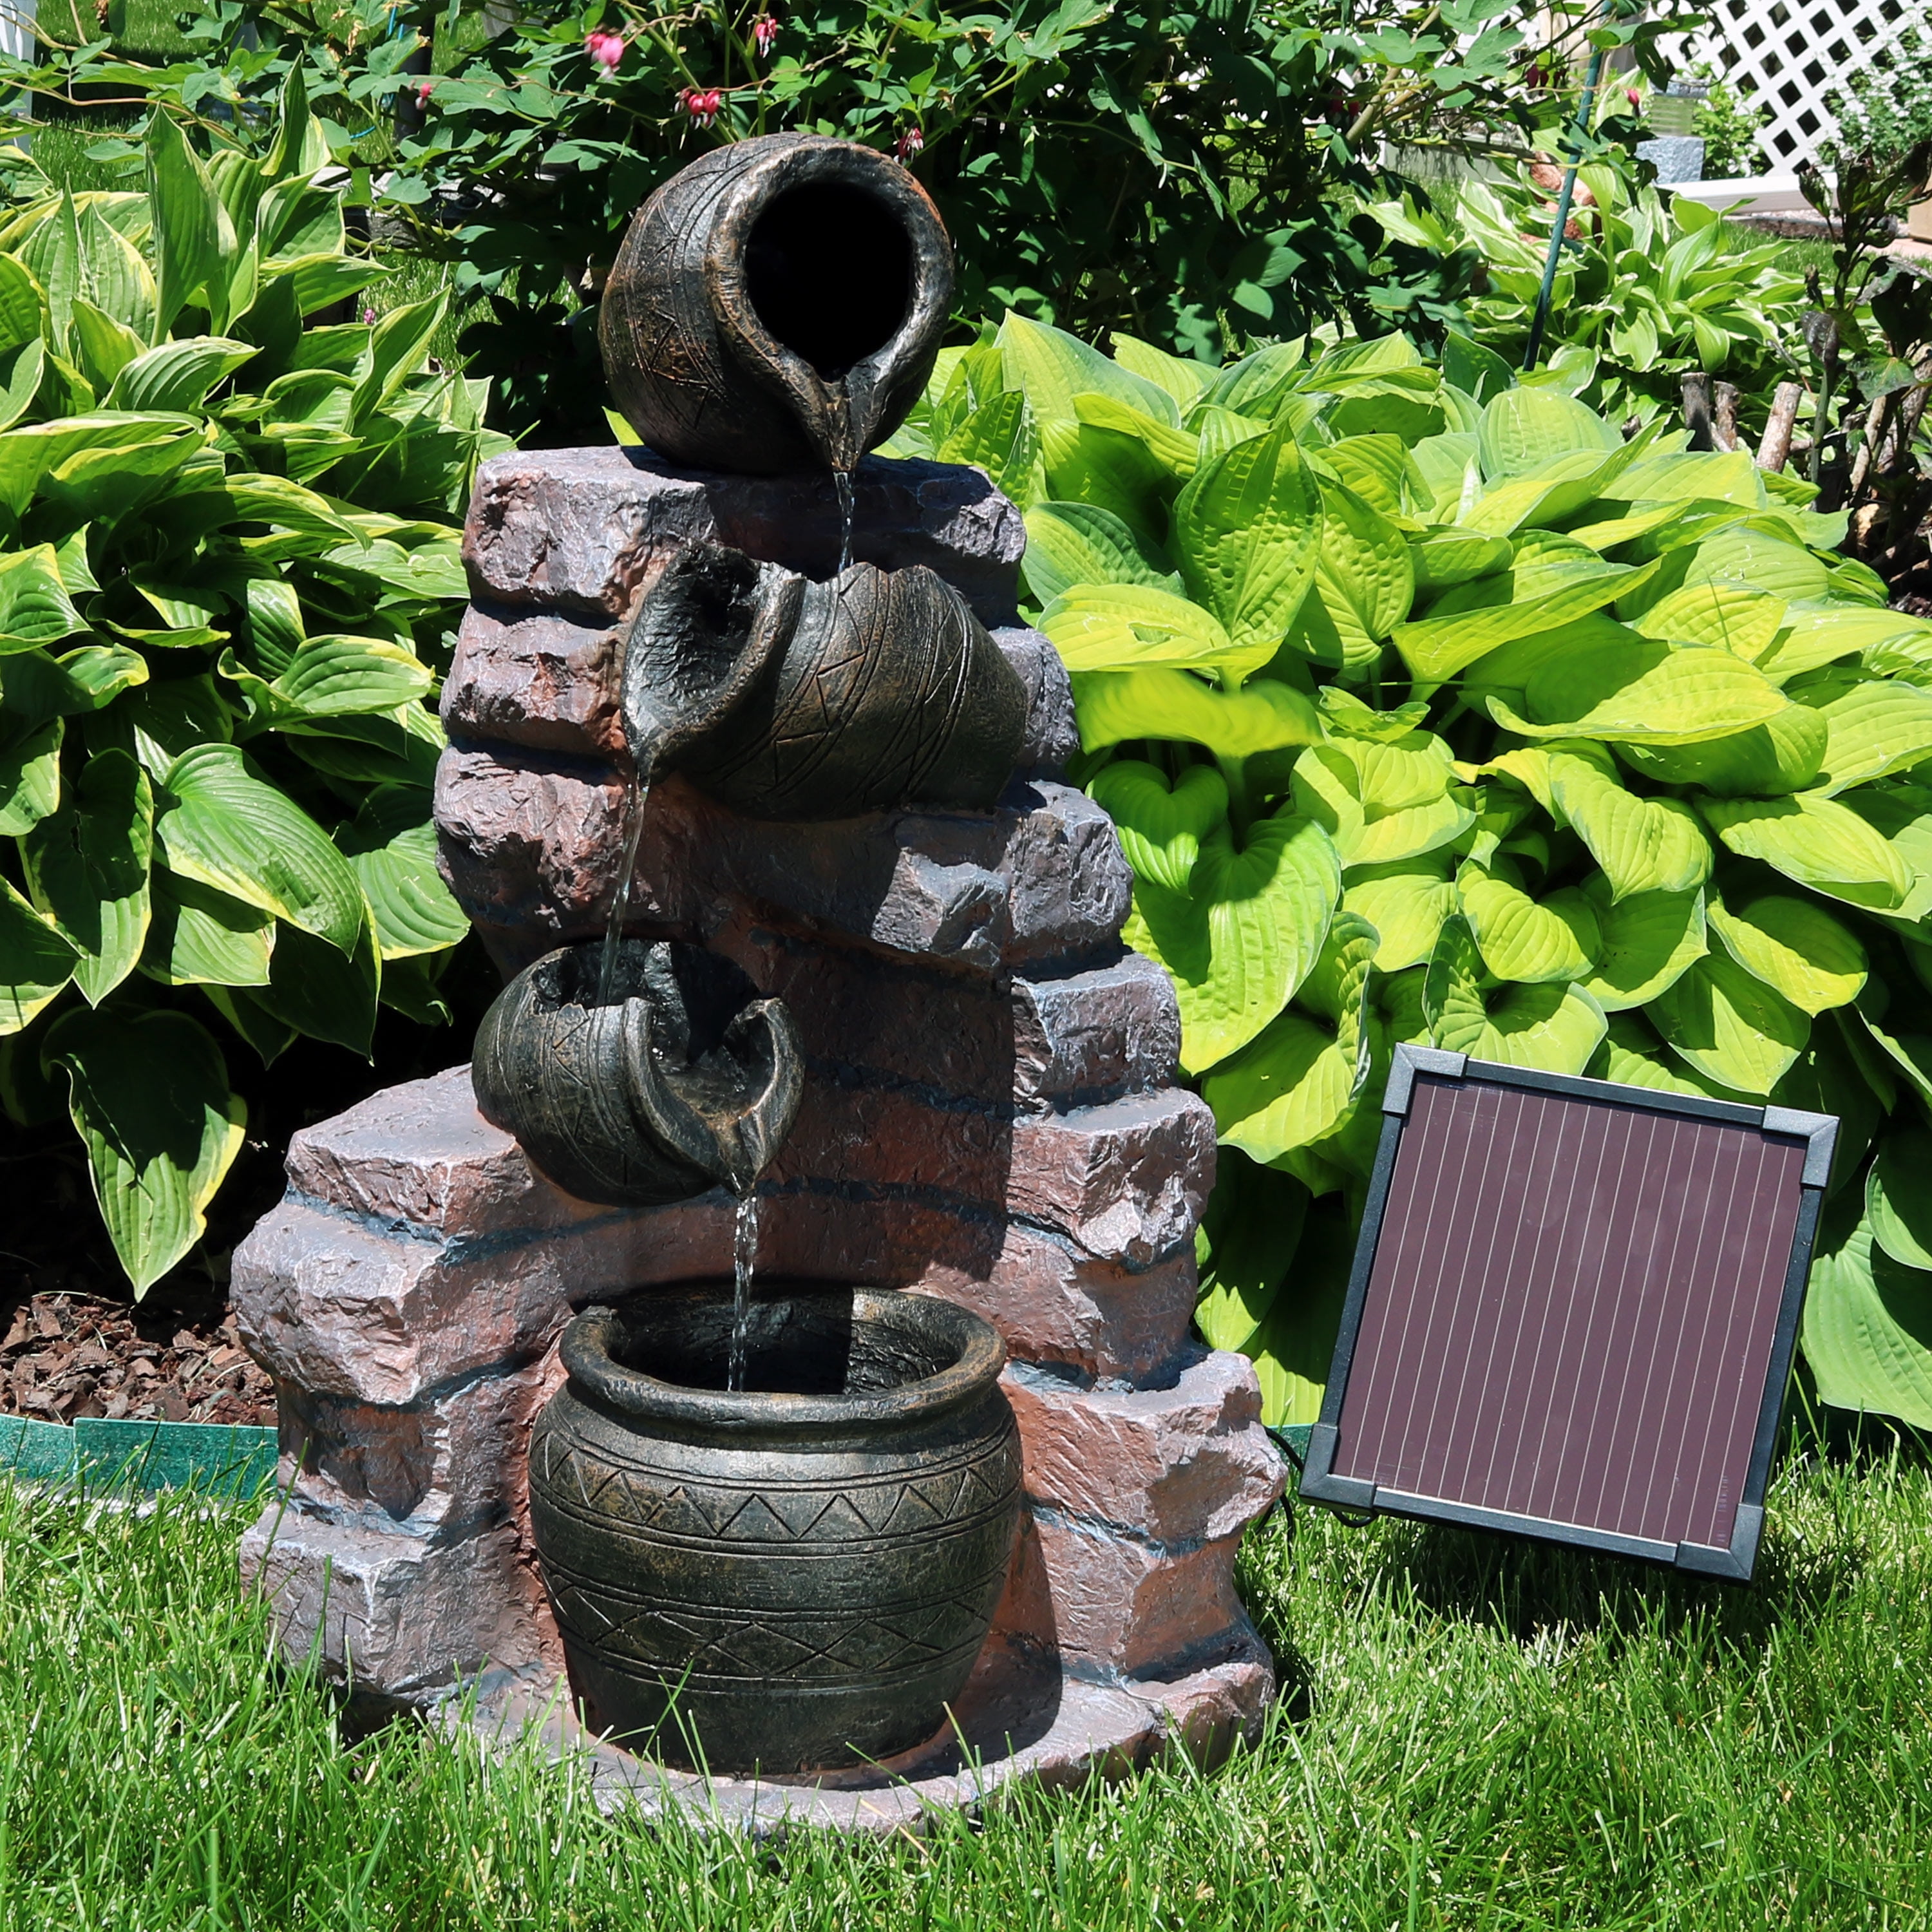  water feature designs for the garden